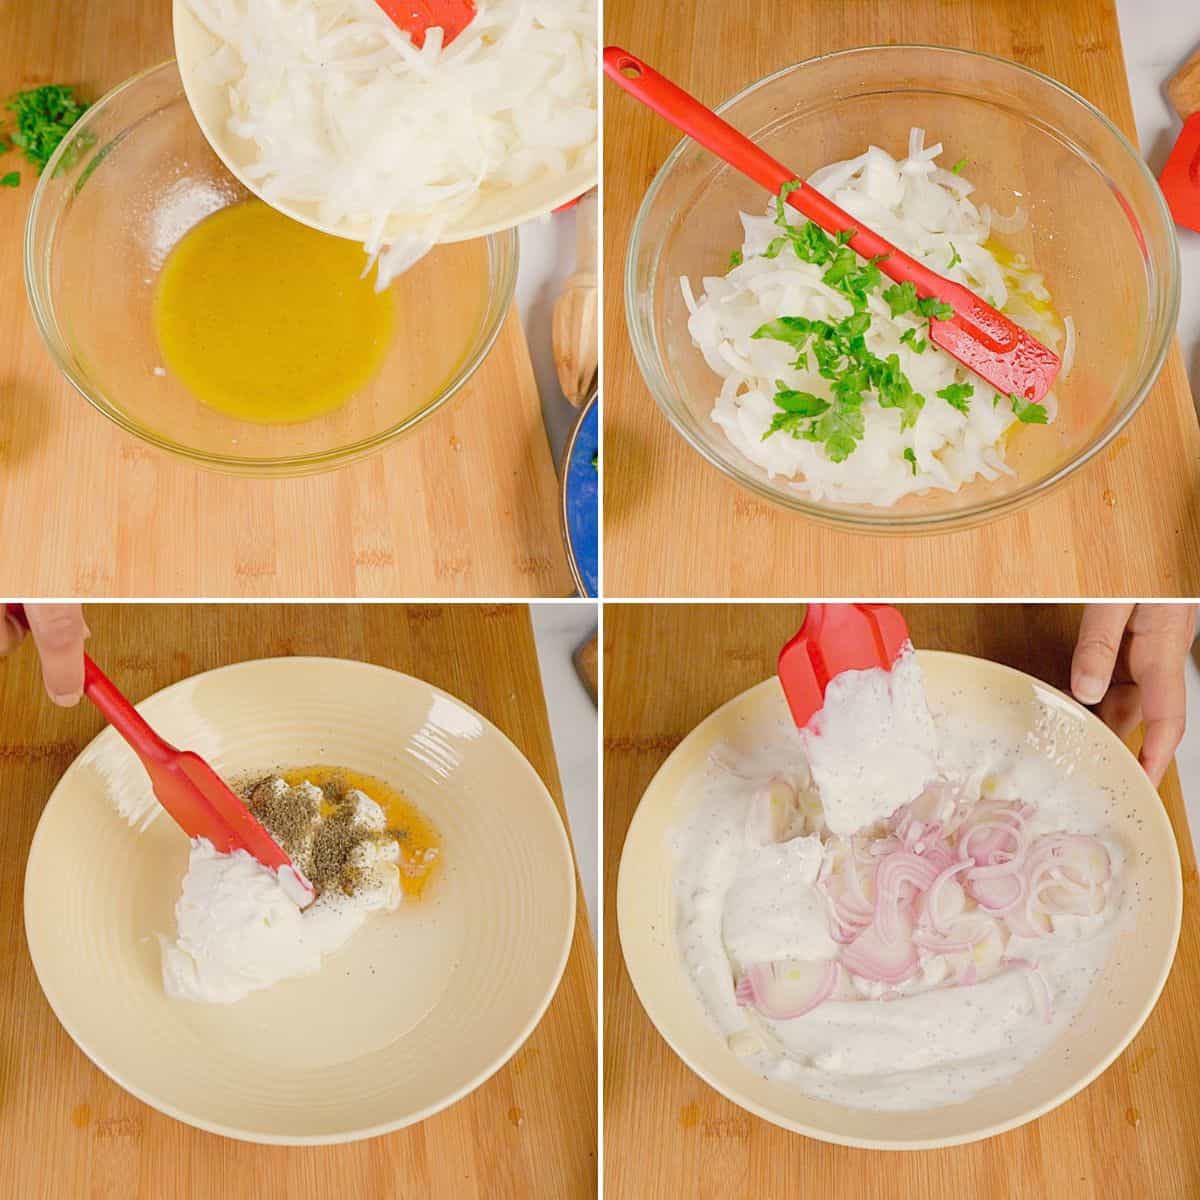 Steps in making the vinegar based and creamy salads.